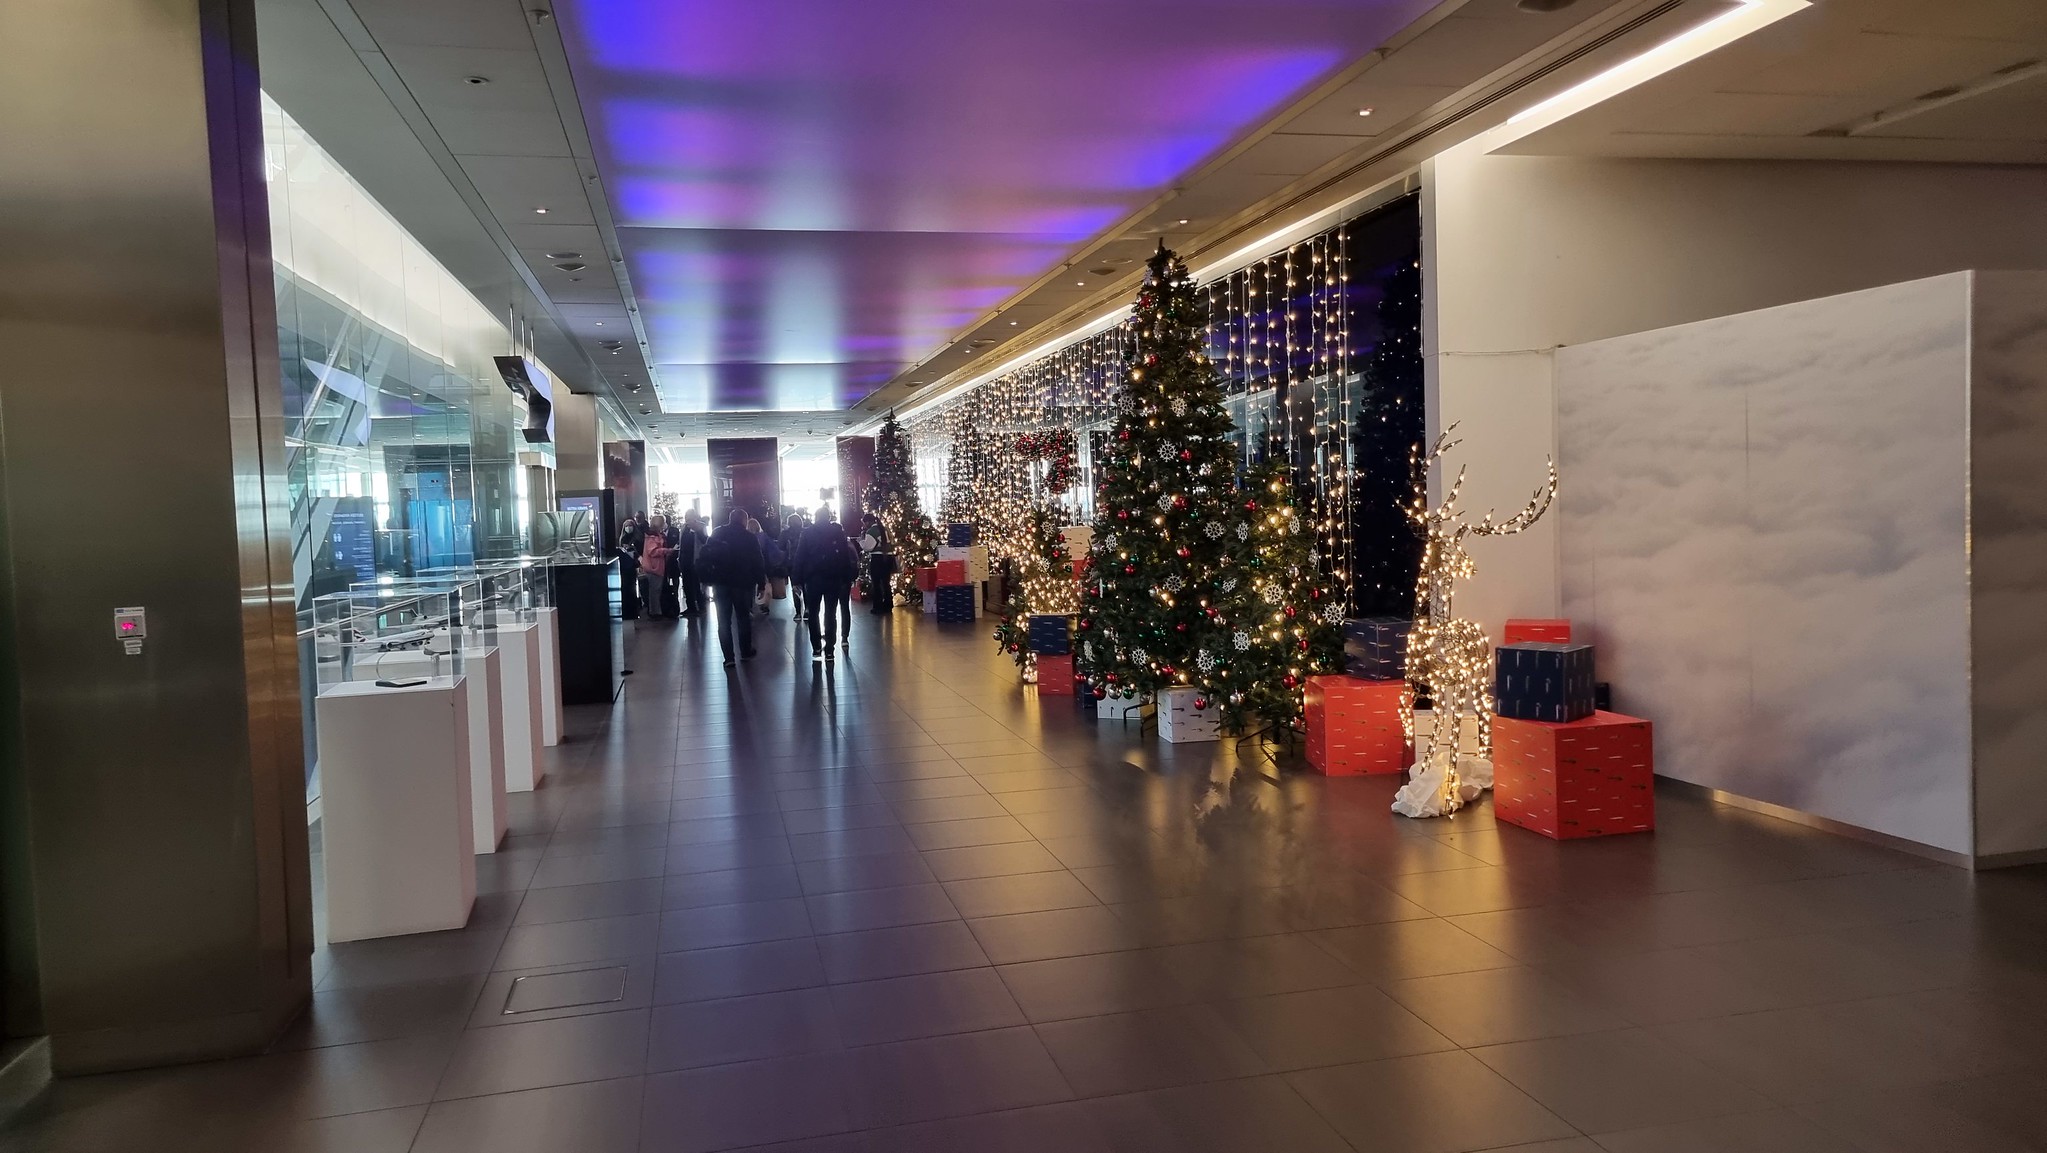 The BA decorations are up at Heathrow T5